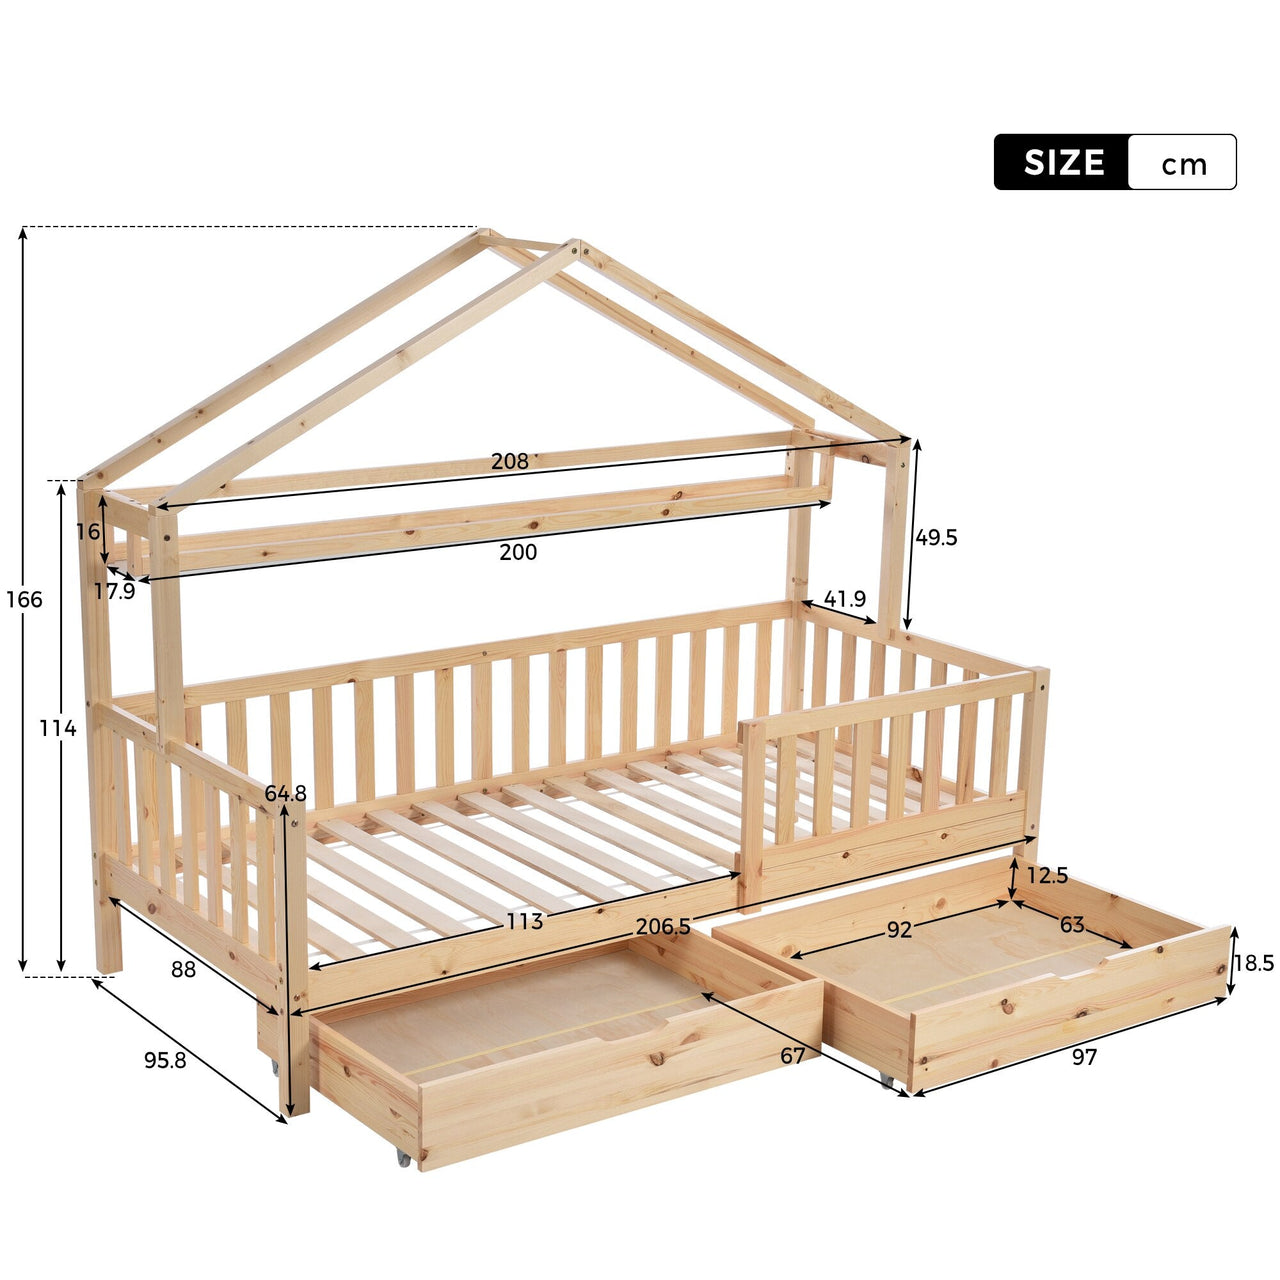 Burlywood House Bed for Children and Youth with Storage Drawers - Casatrail.com